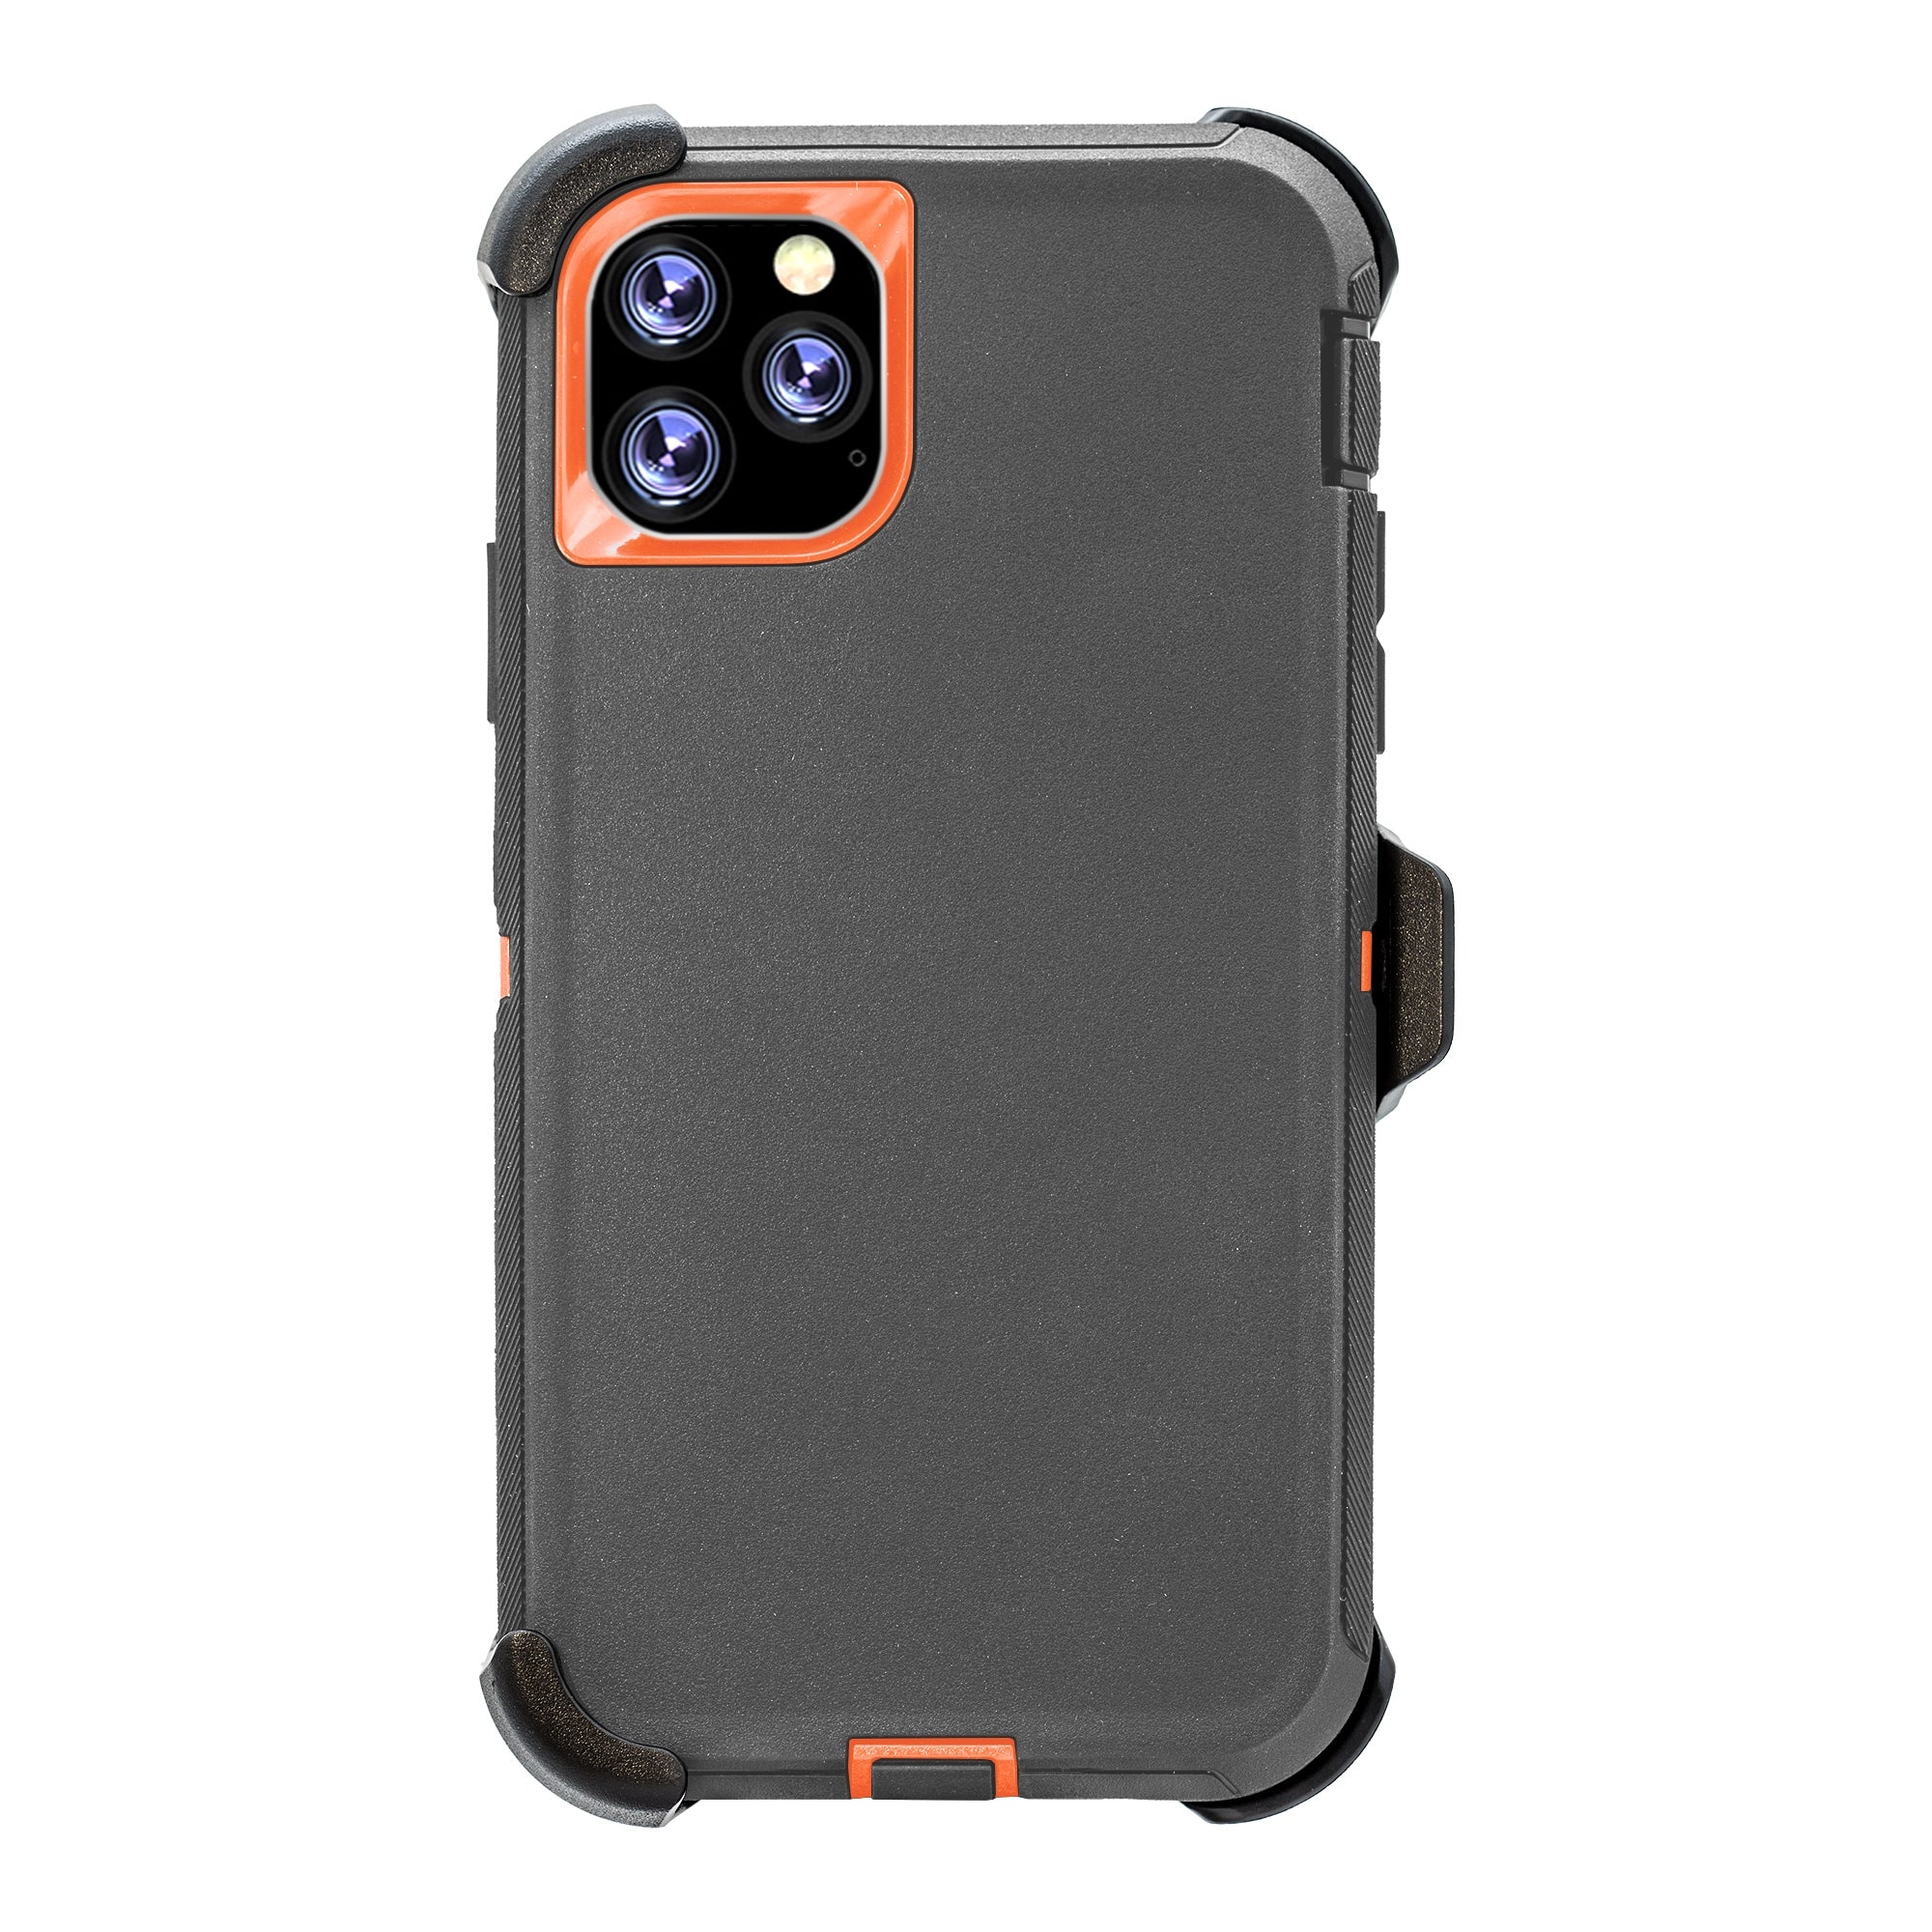 iPhone 11 Pro Max (6.5") Full Protection Heavy Duty Shockproof Case